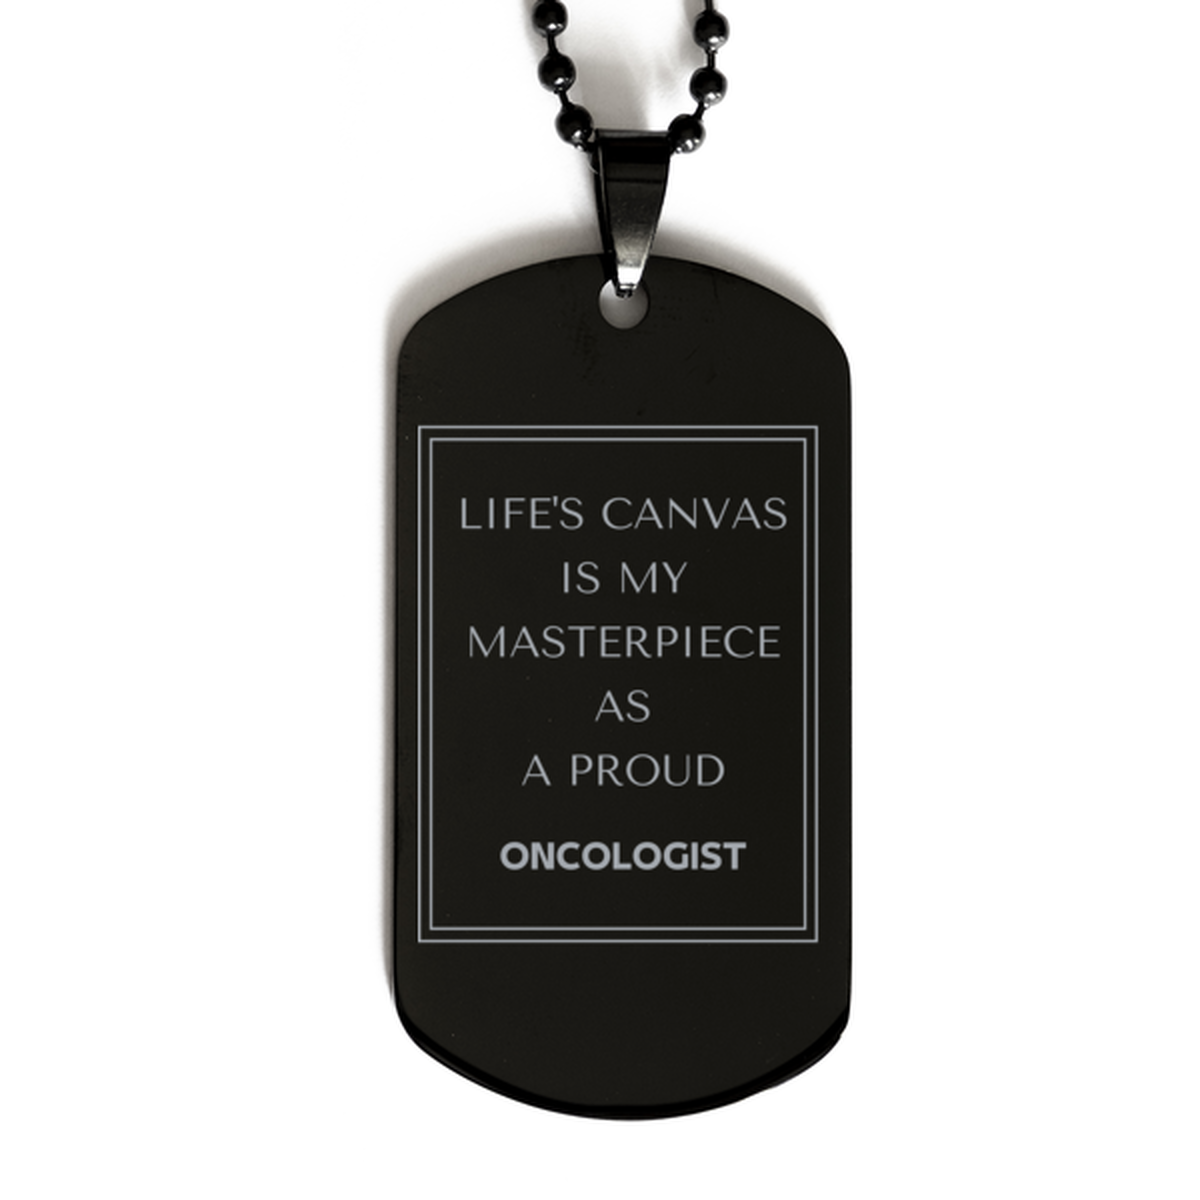 Proud Oncologist Gifts, Life's canvas is my masterpiece, Epic Birthday Christmas Unique Black Dog Tag For Oncologist, Coworkers, Men, Women, Friends